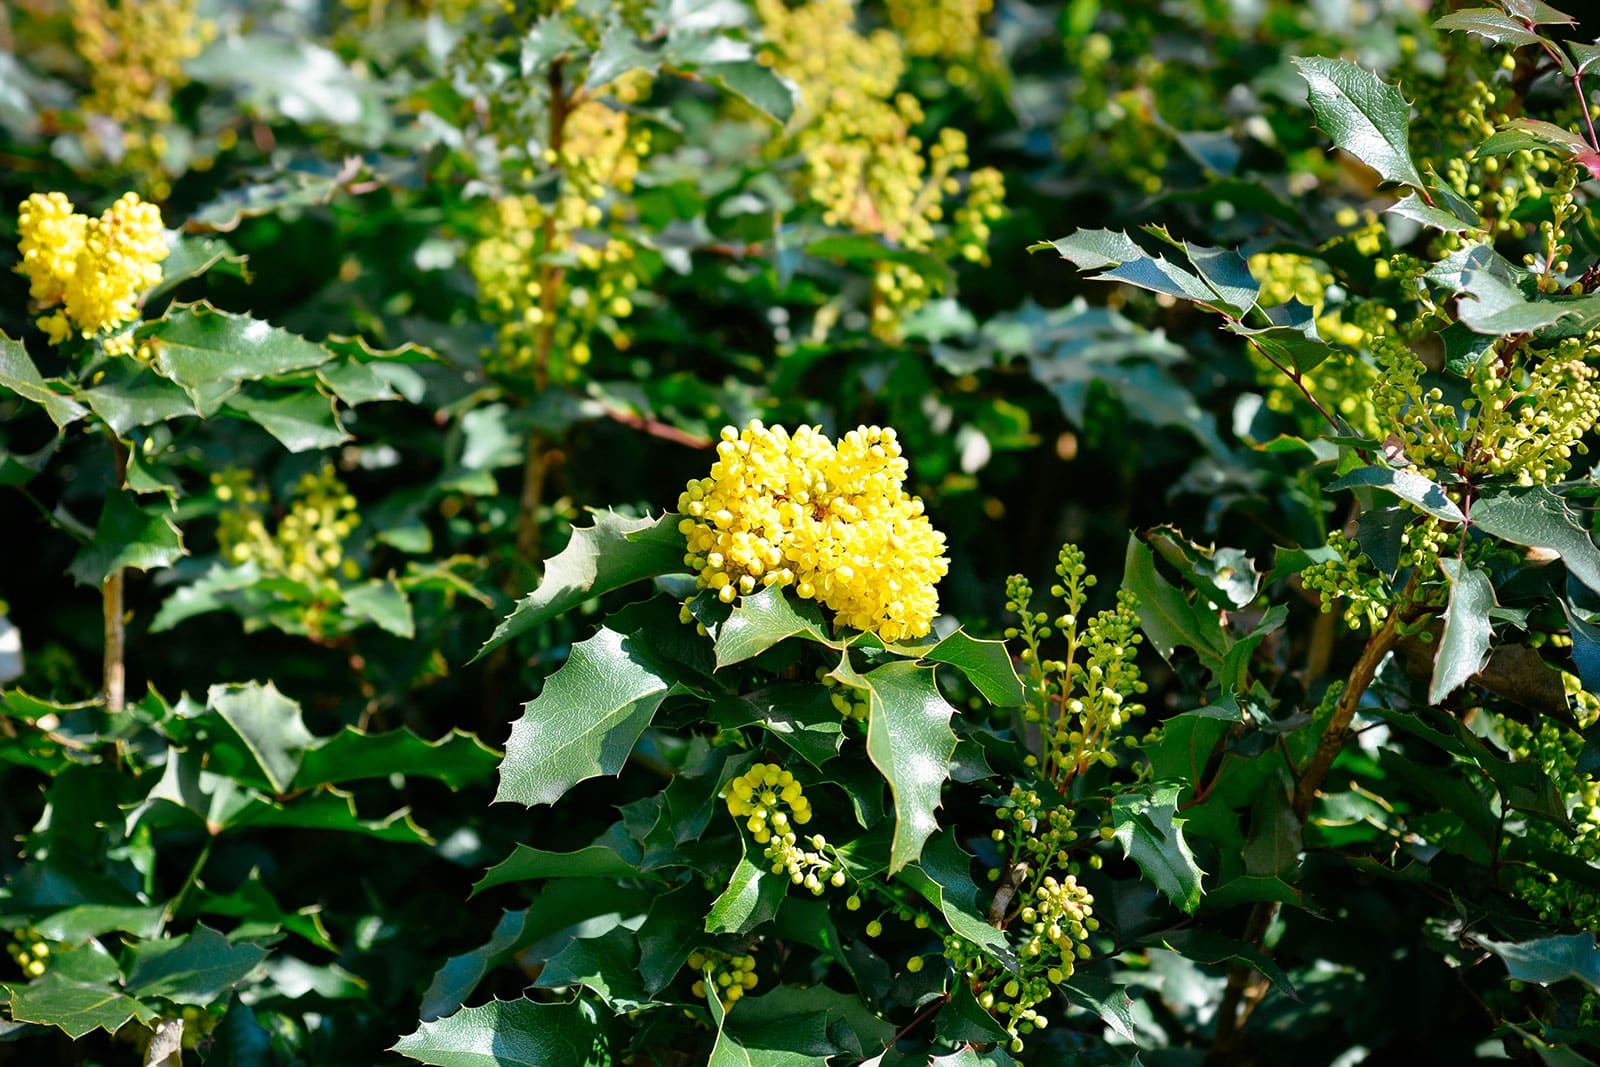 Creeping Oregon grape ground cover with tiny yellow clusters of flowers